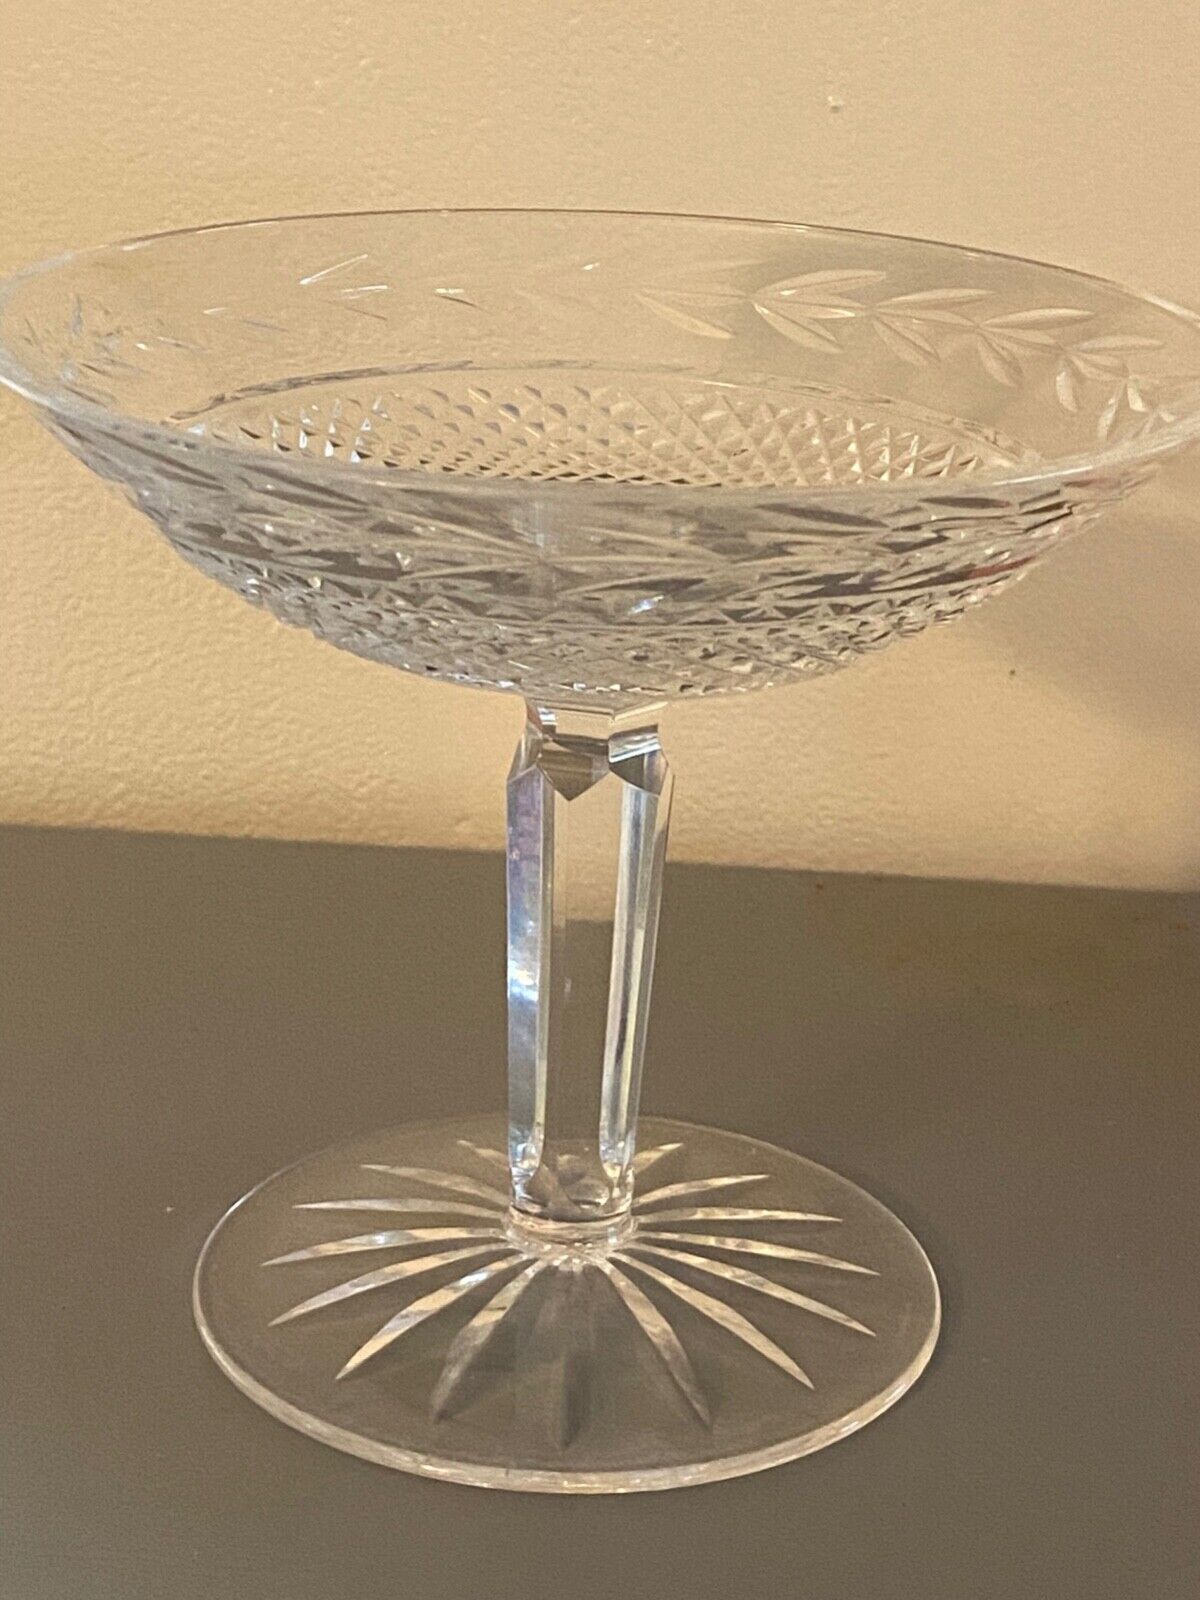 Waterford Crystal Compote or Candy Dish